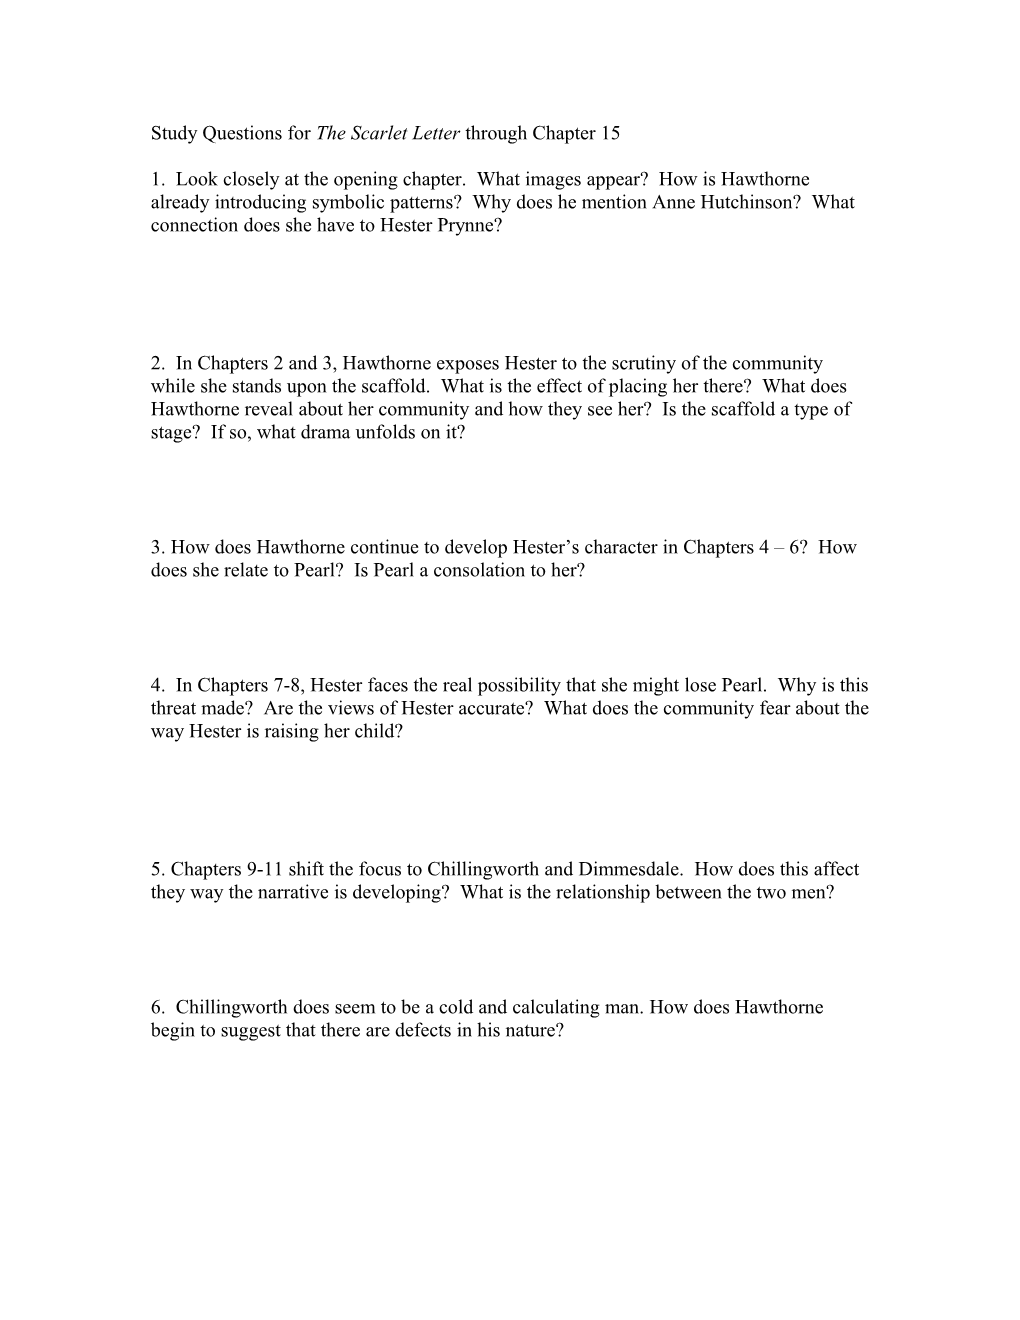 Study Questions for the Scarlet Letter Through Chapter 15